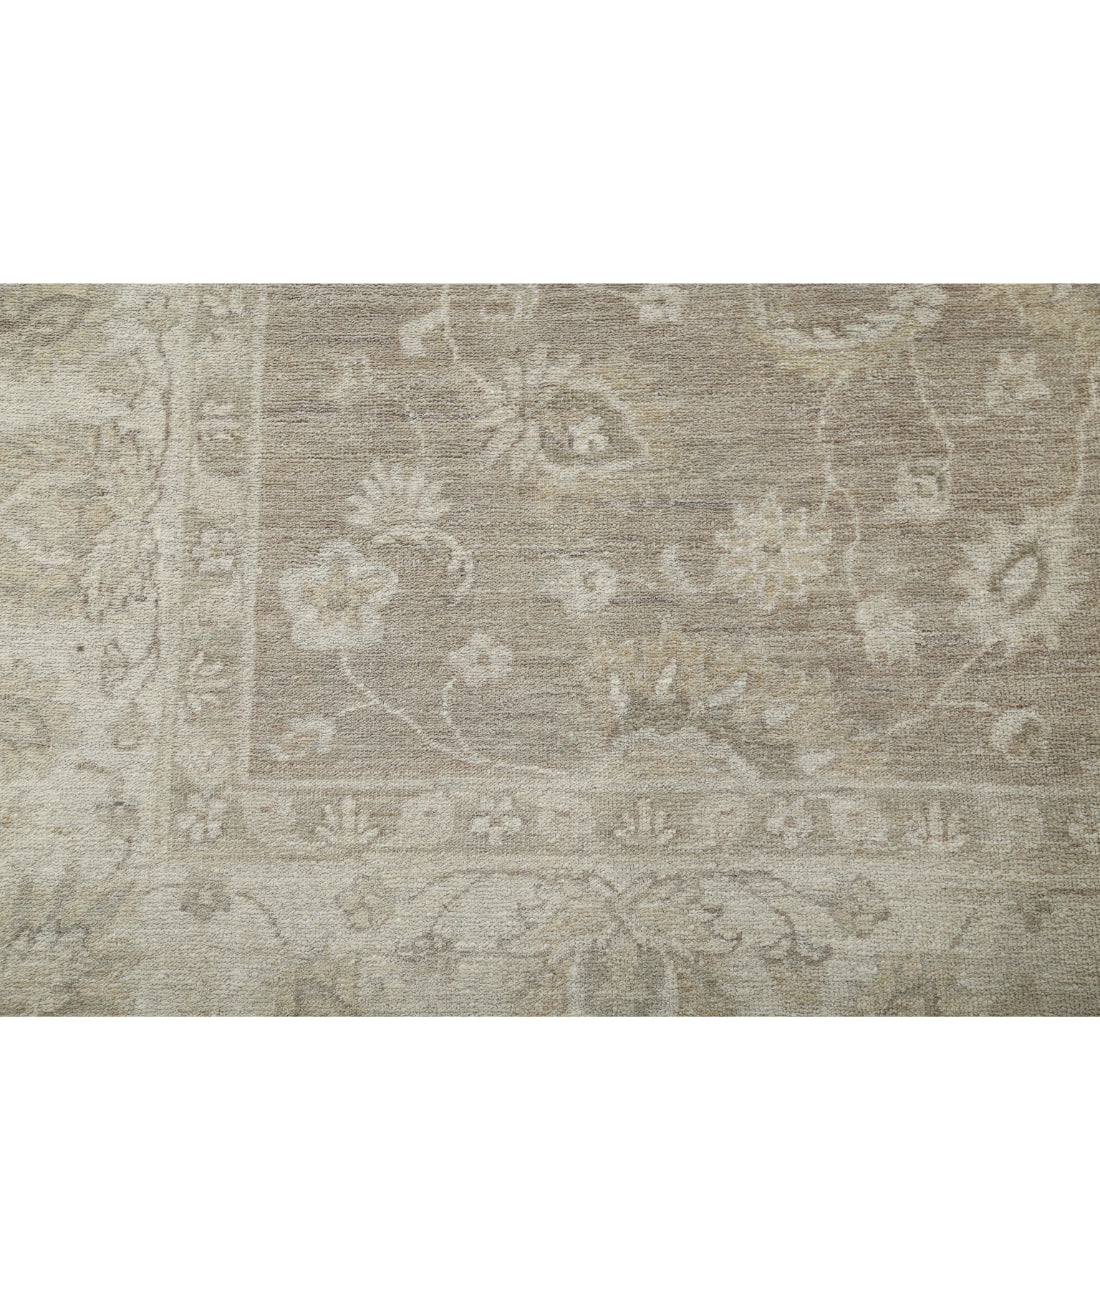 Hand Knotted Serenity Wool Rug - 6'4'' x 8'0'' 6'4'' x 8'0'' (190 X 240) / Taupe / Ivory